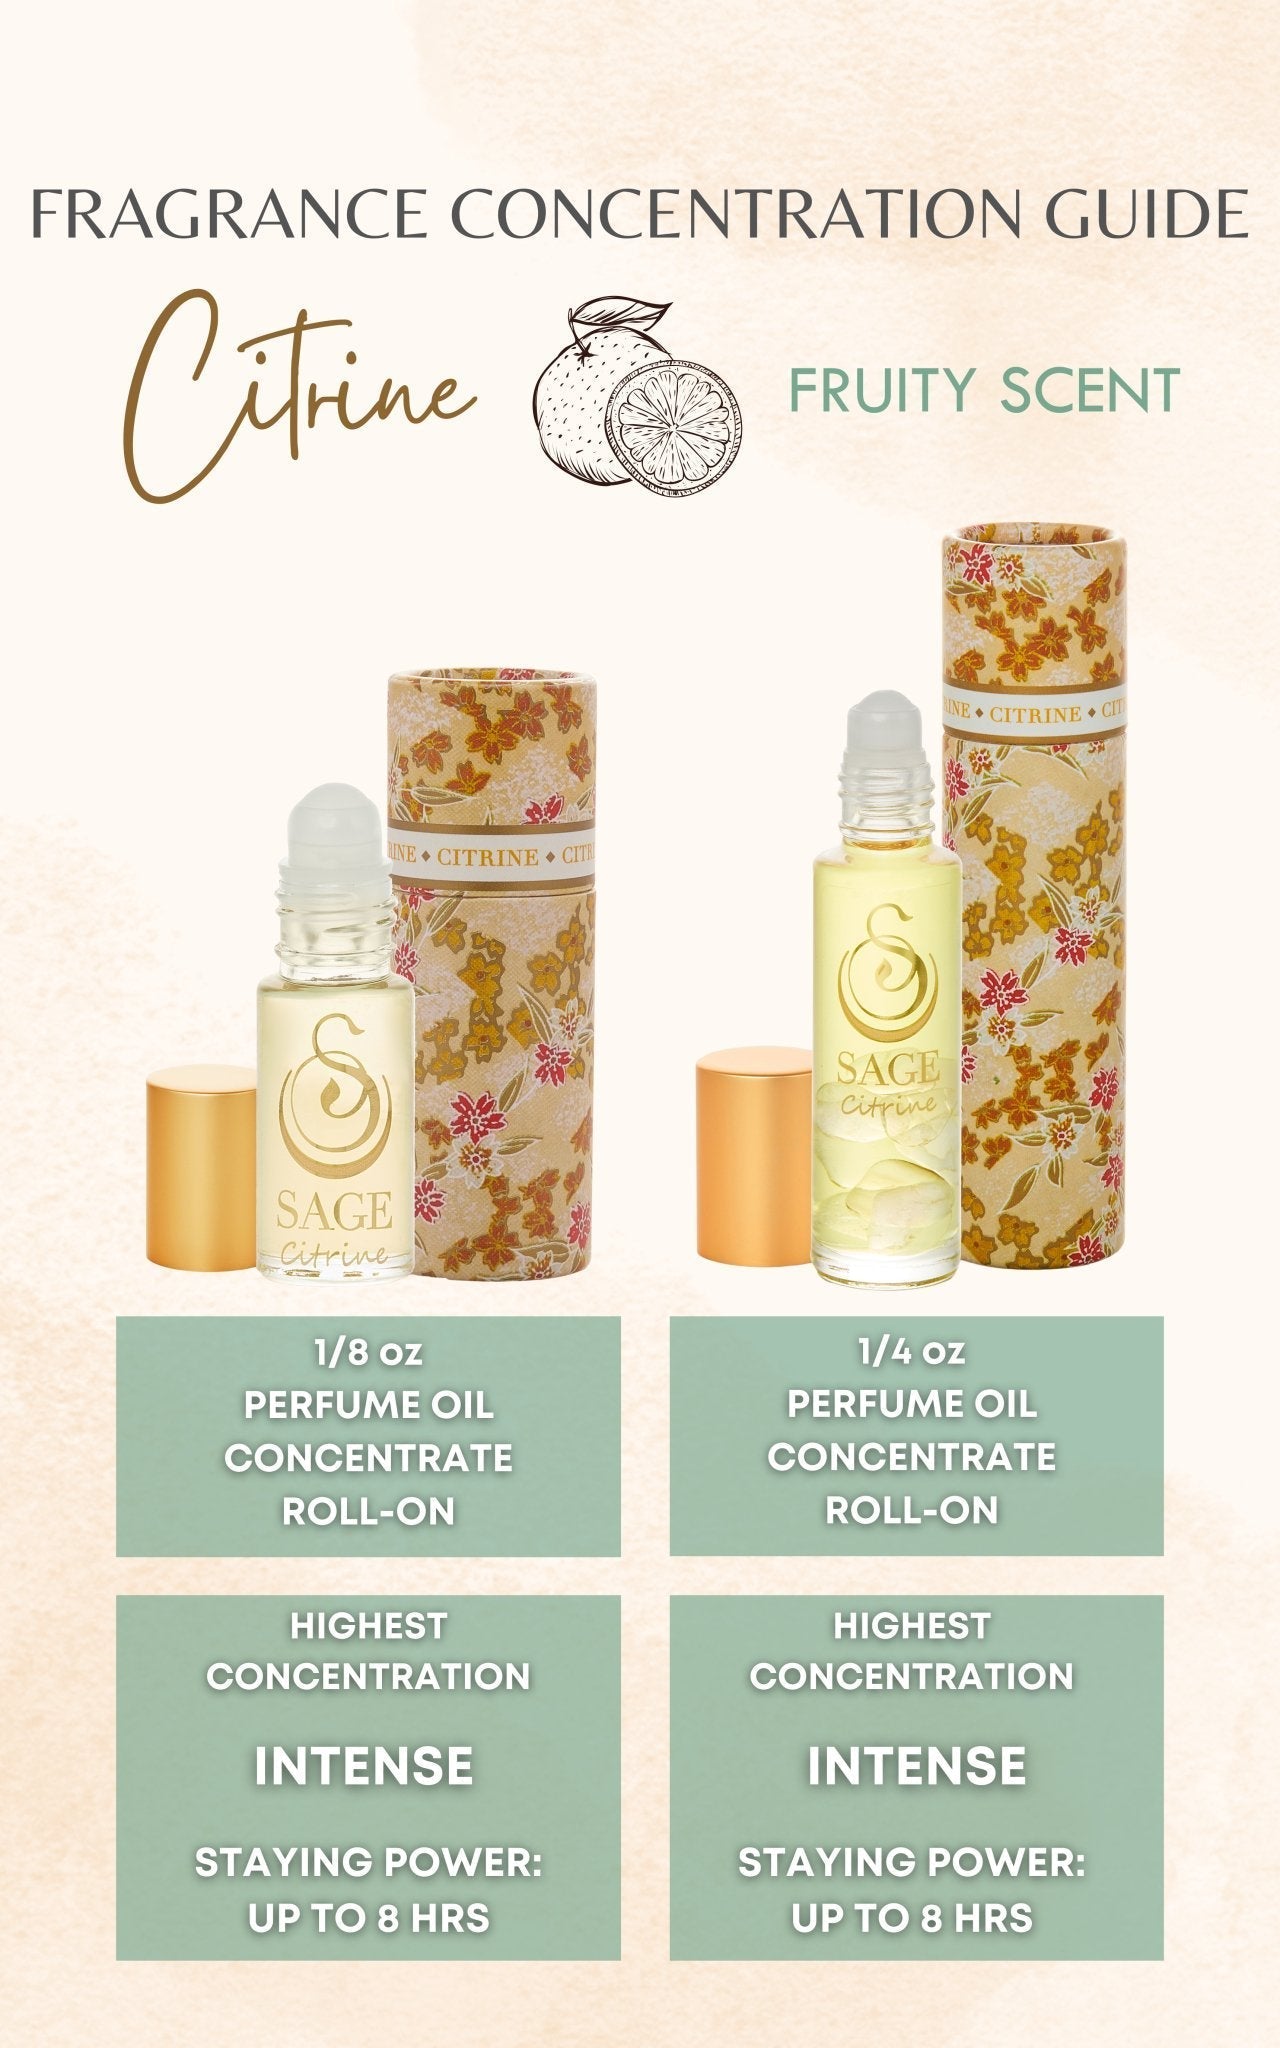 Citrine Perfume Oil Concentrate Mini Rollie with Gemstones by Sage - The Sage Lifestyle